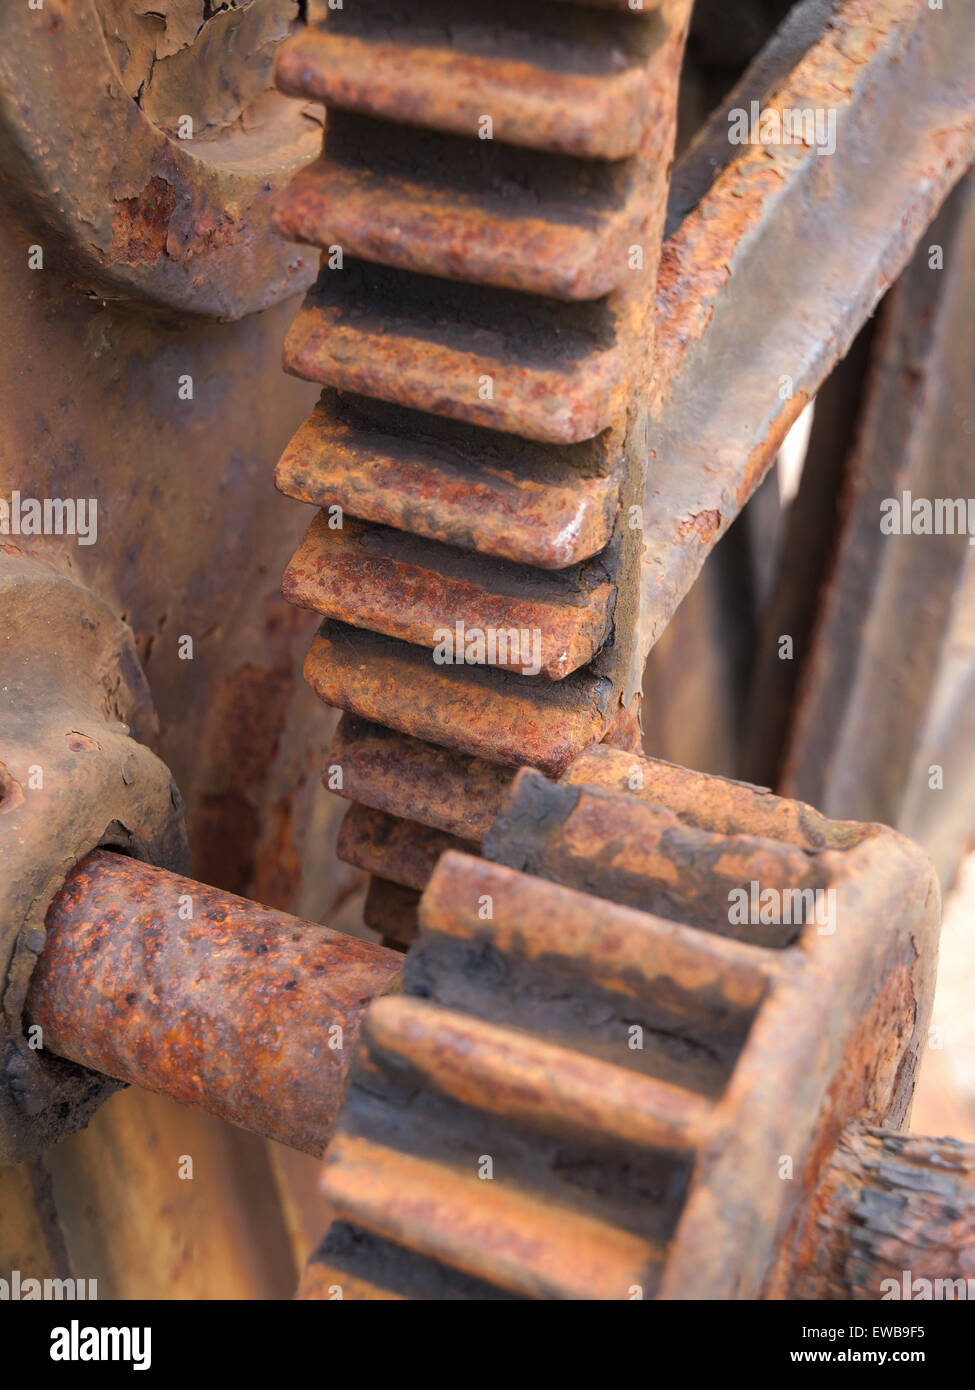 Rusty gear detail of an old machine Stock Photo